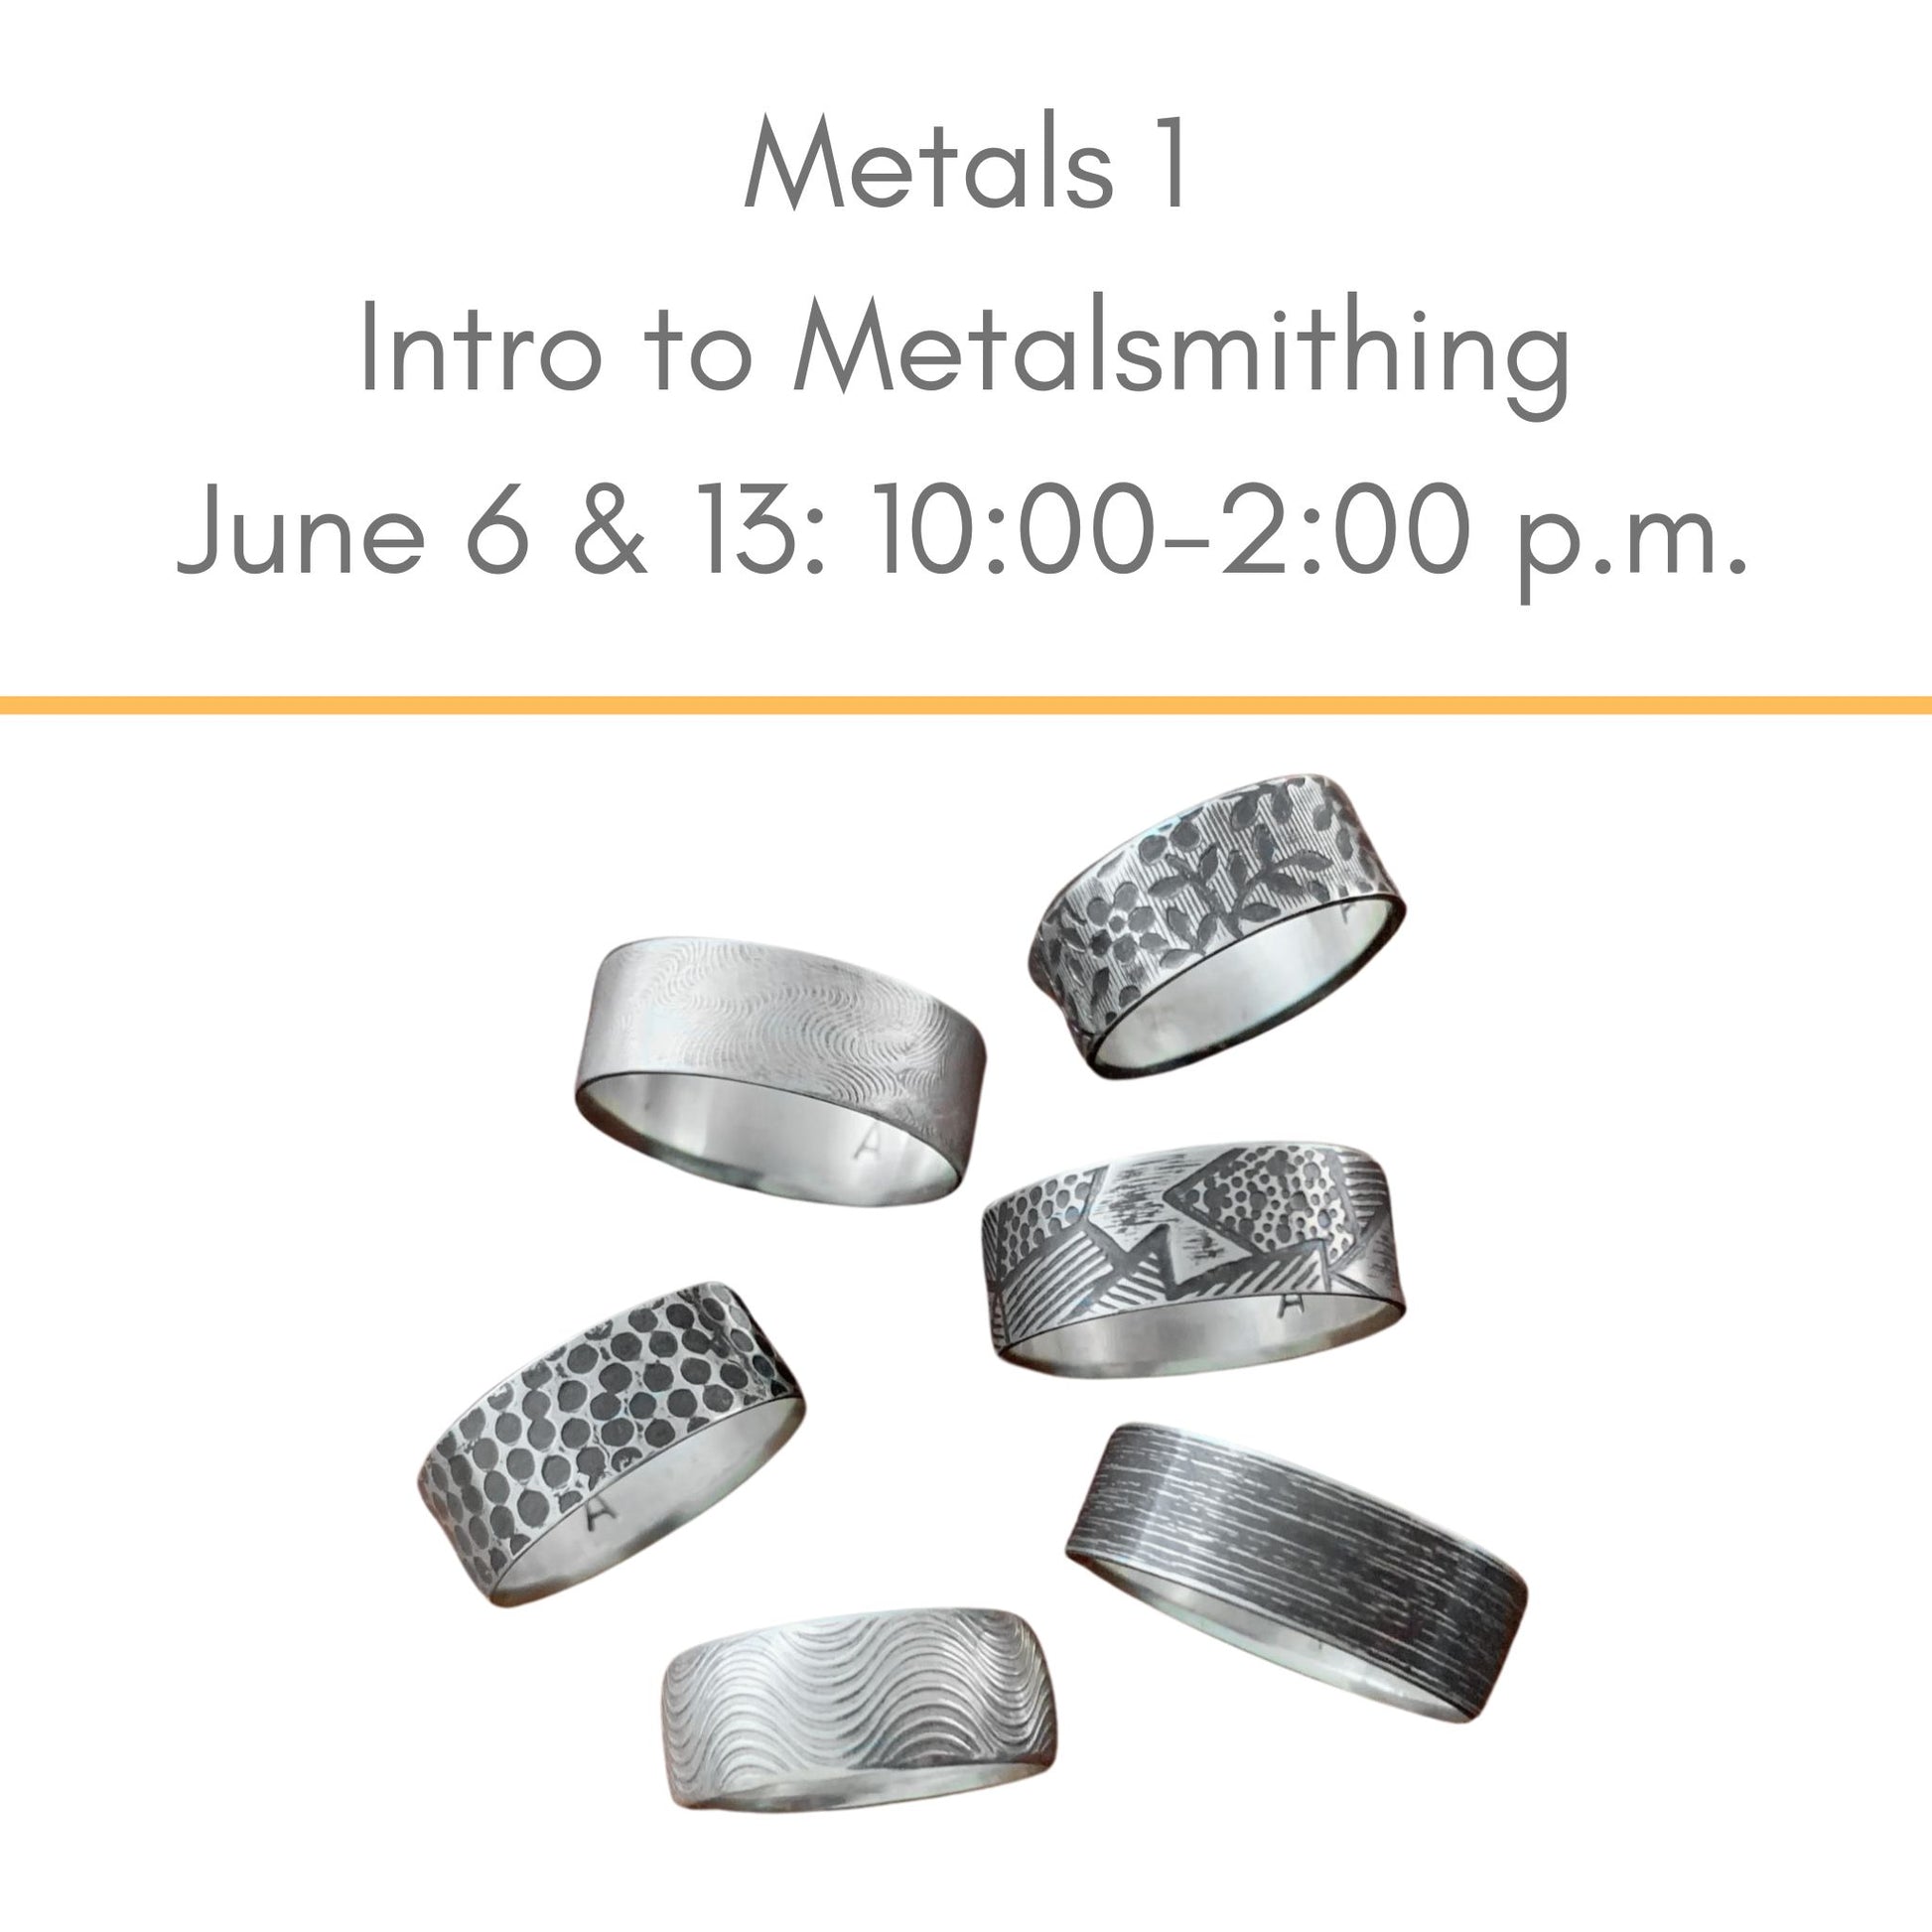 Intro to metalsmithing jewelry class June weekday session